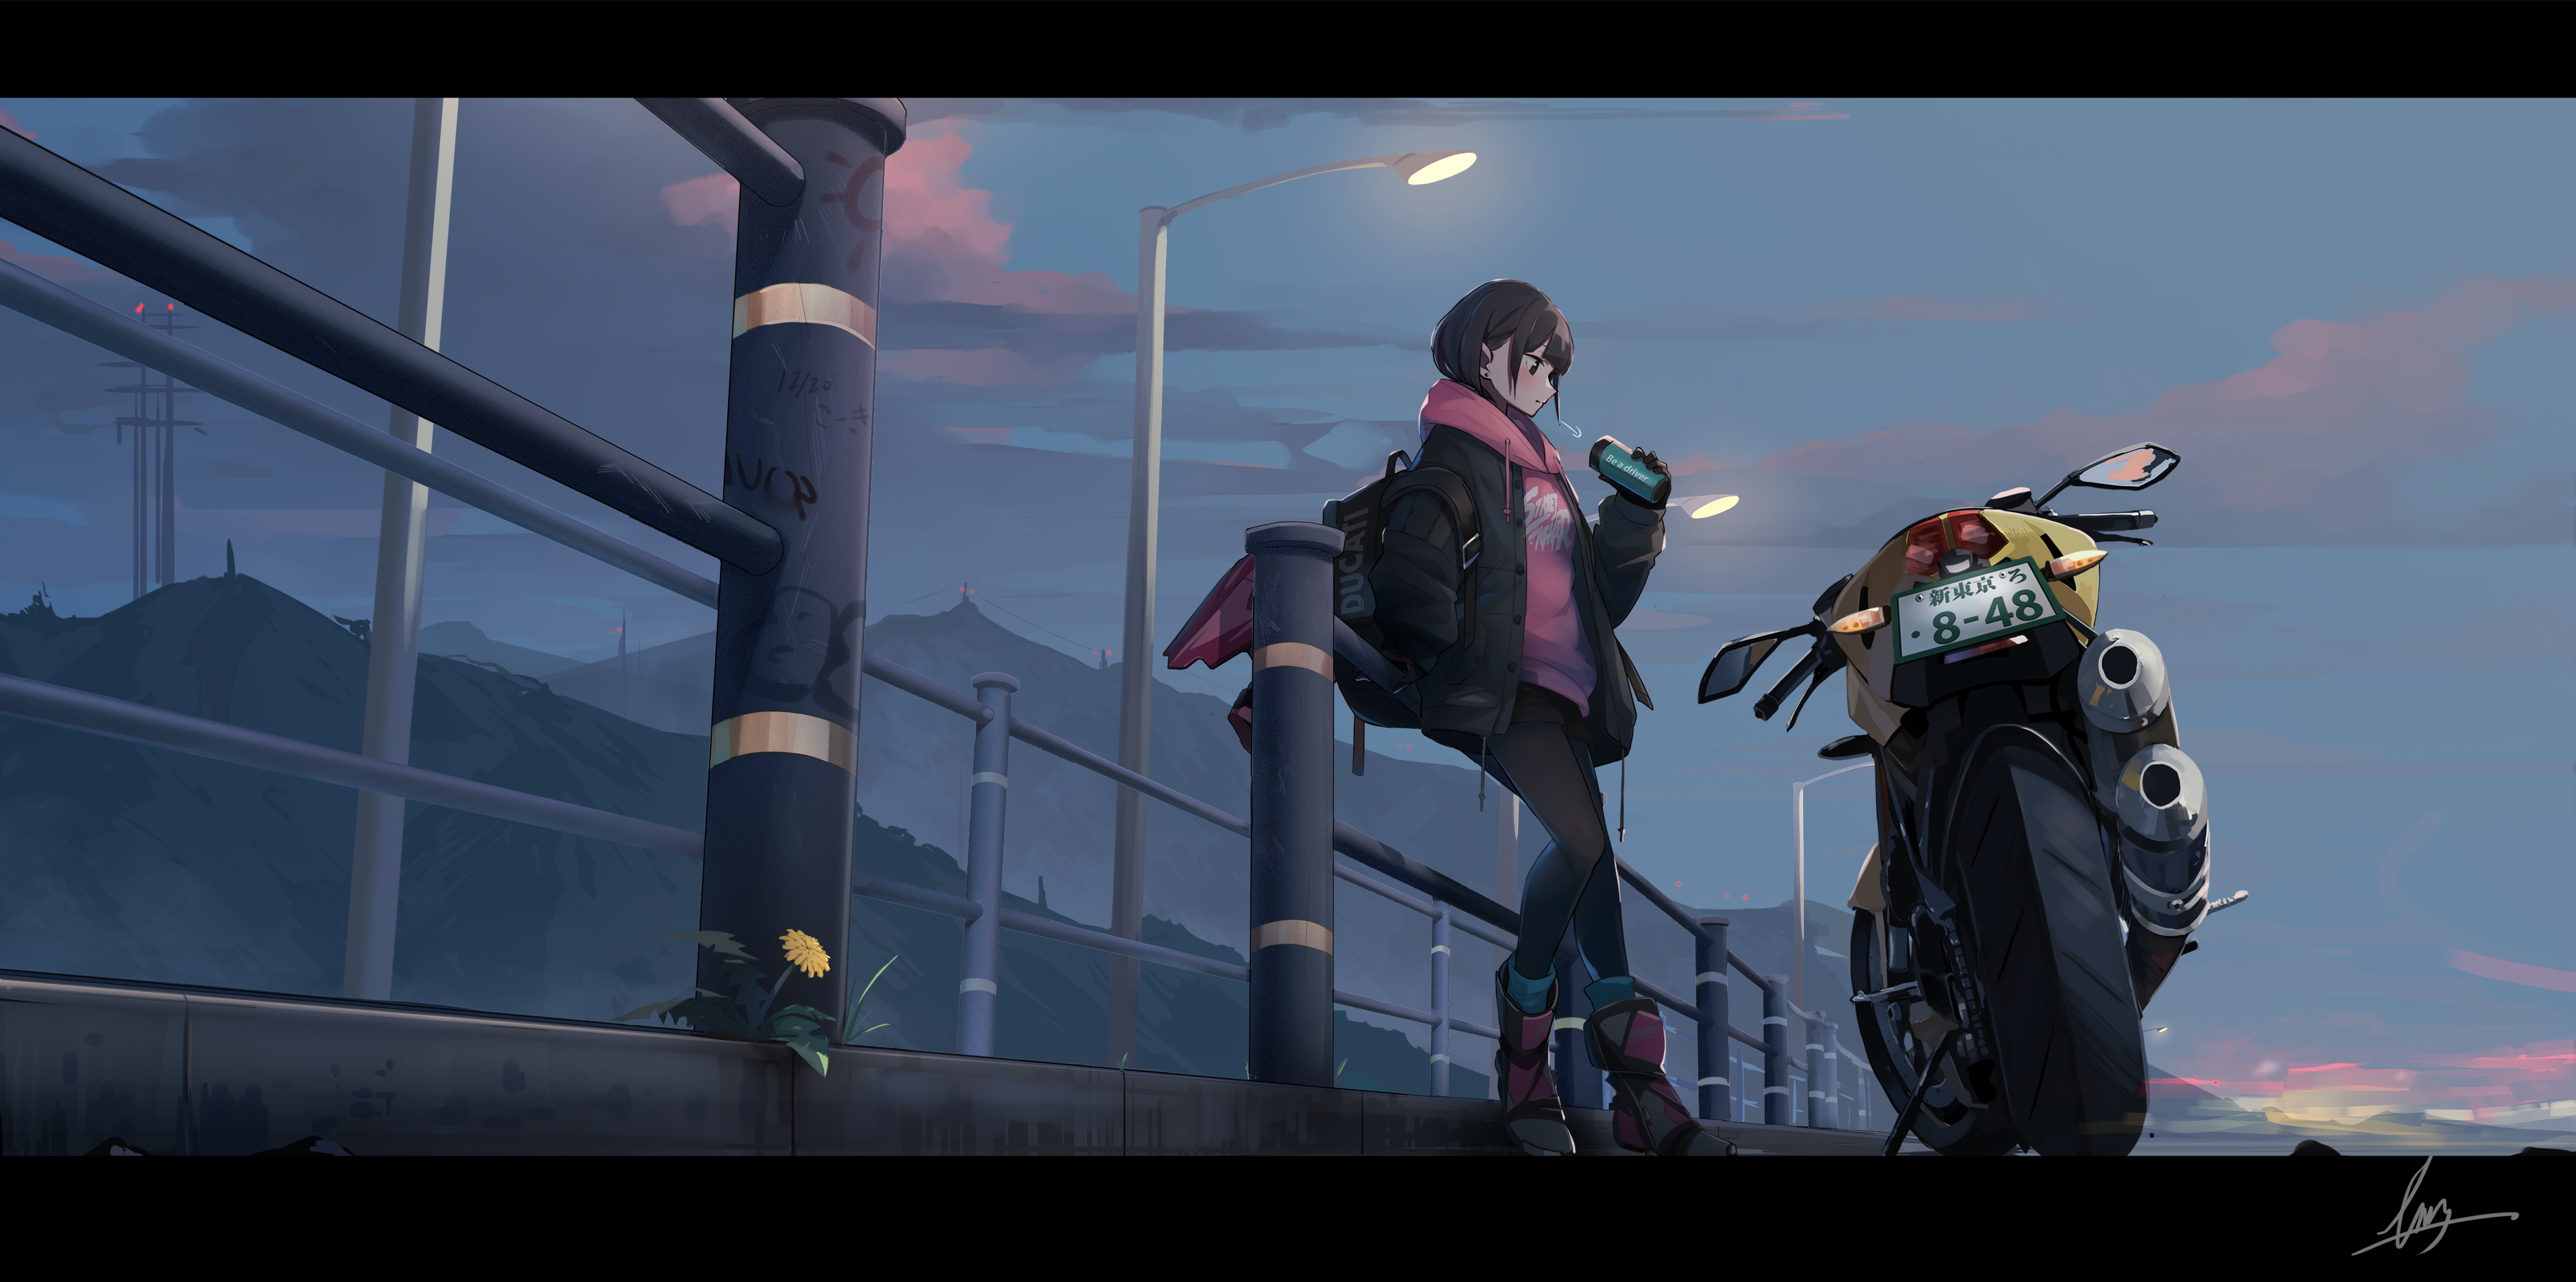 Anime 5041x2508 anime motorcycle scarf jacket boots street light clouds fence Street Fighter